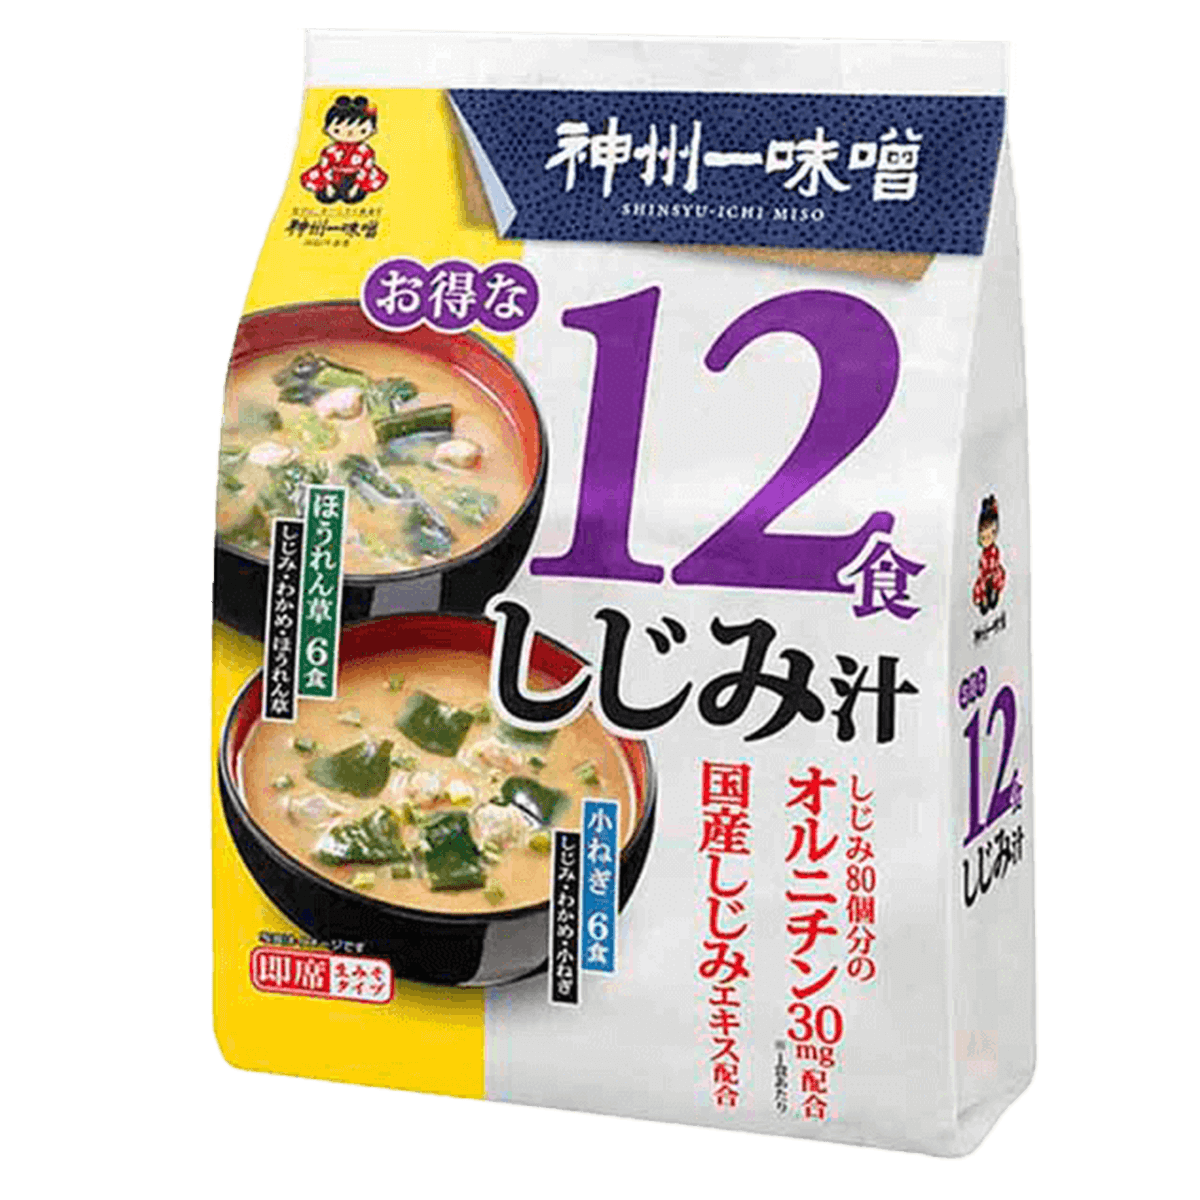 Instant Miso Soup with Clams